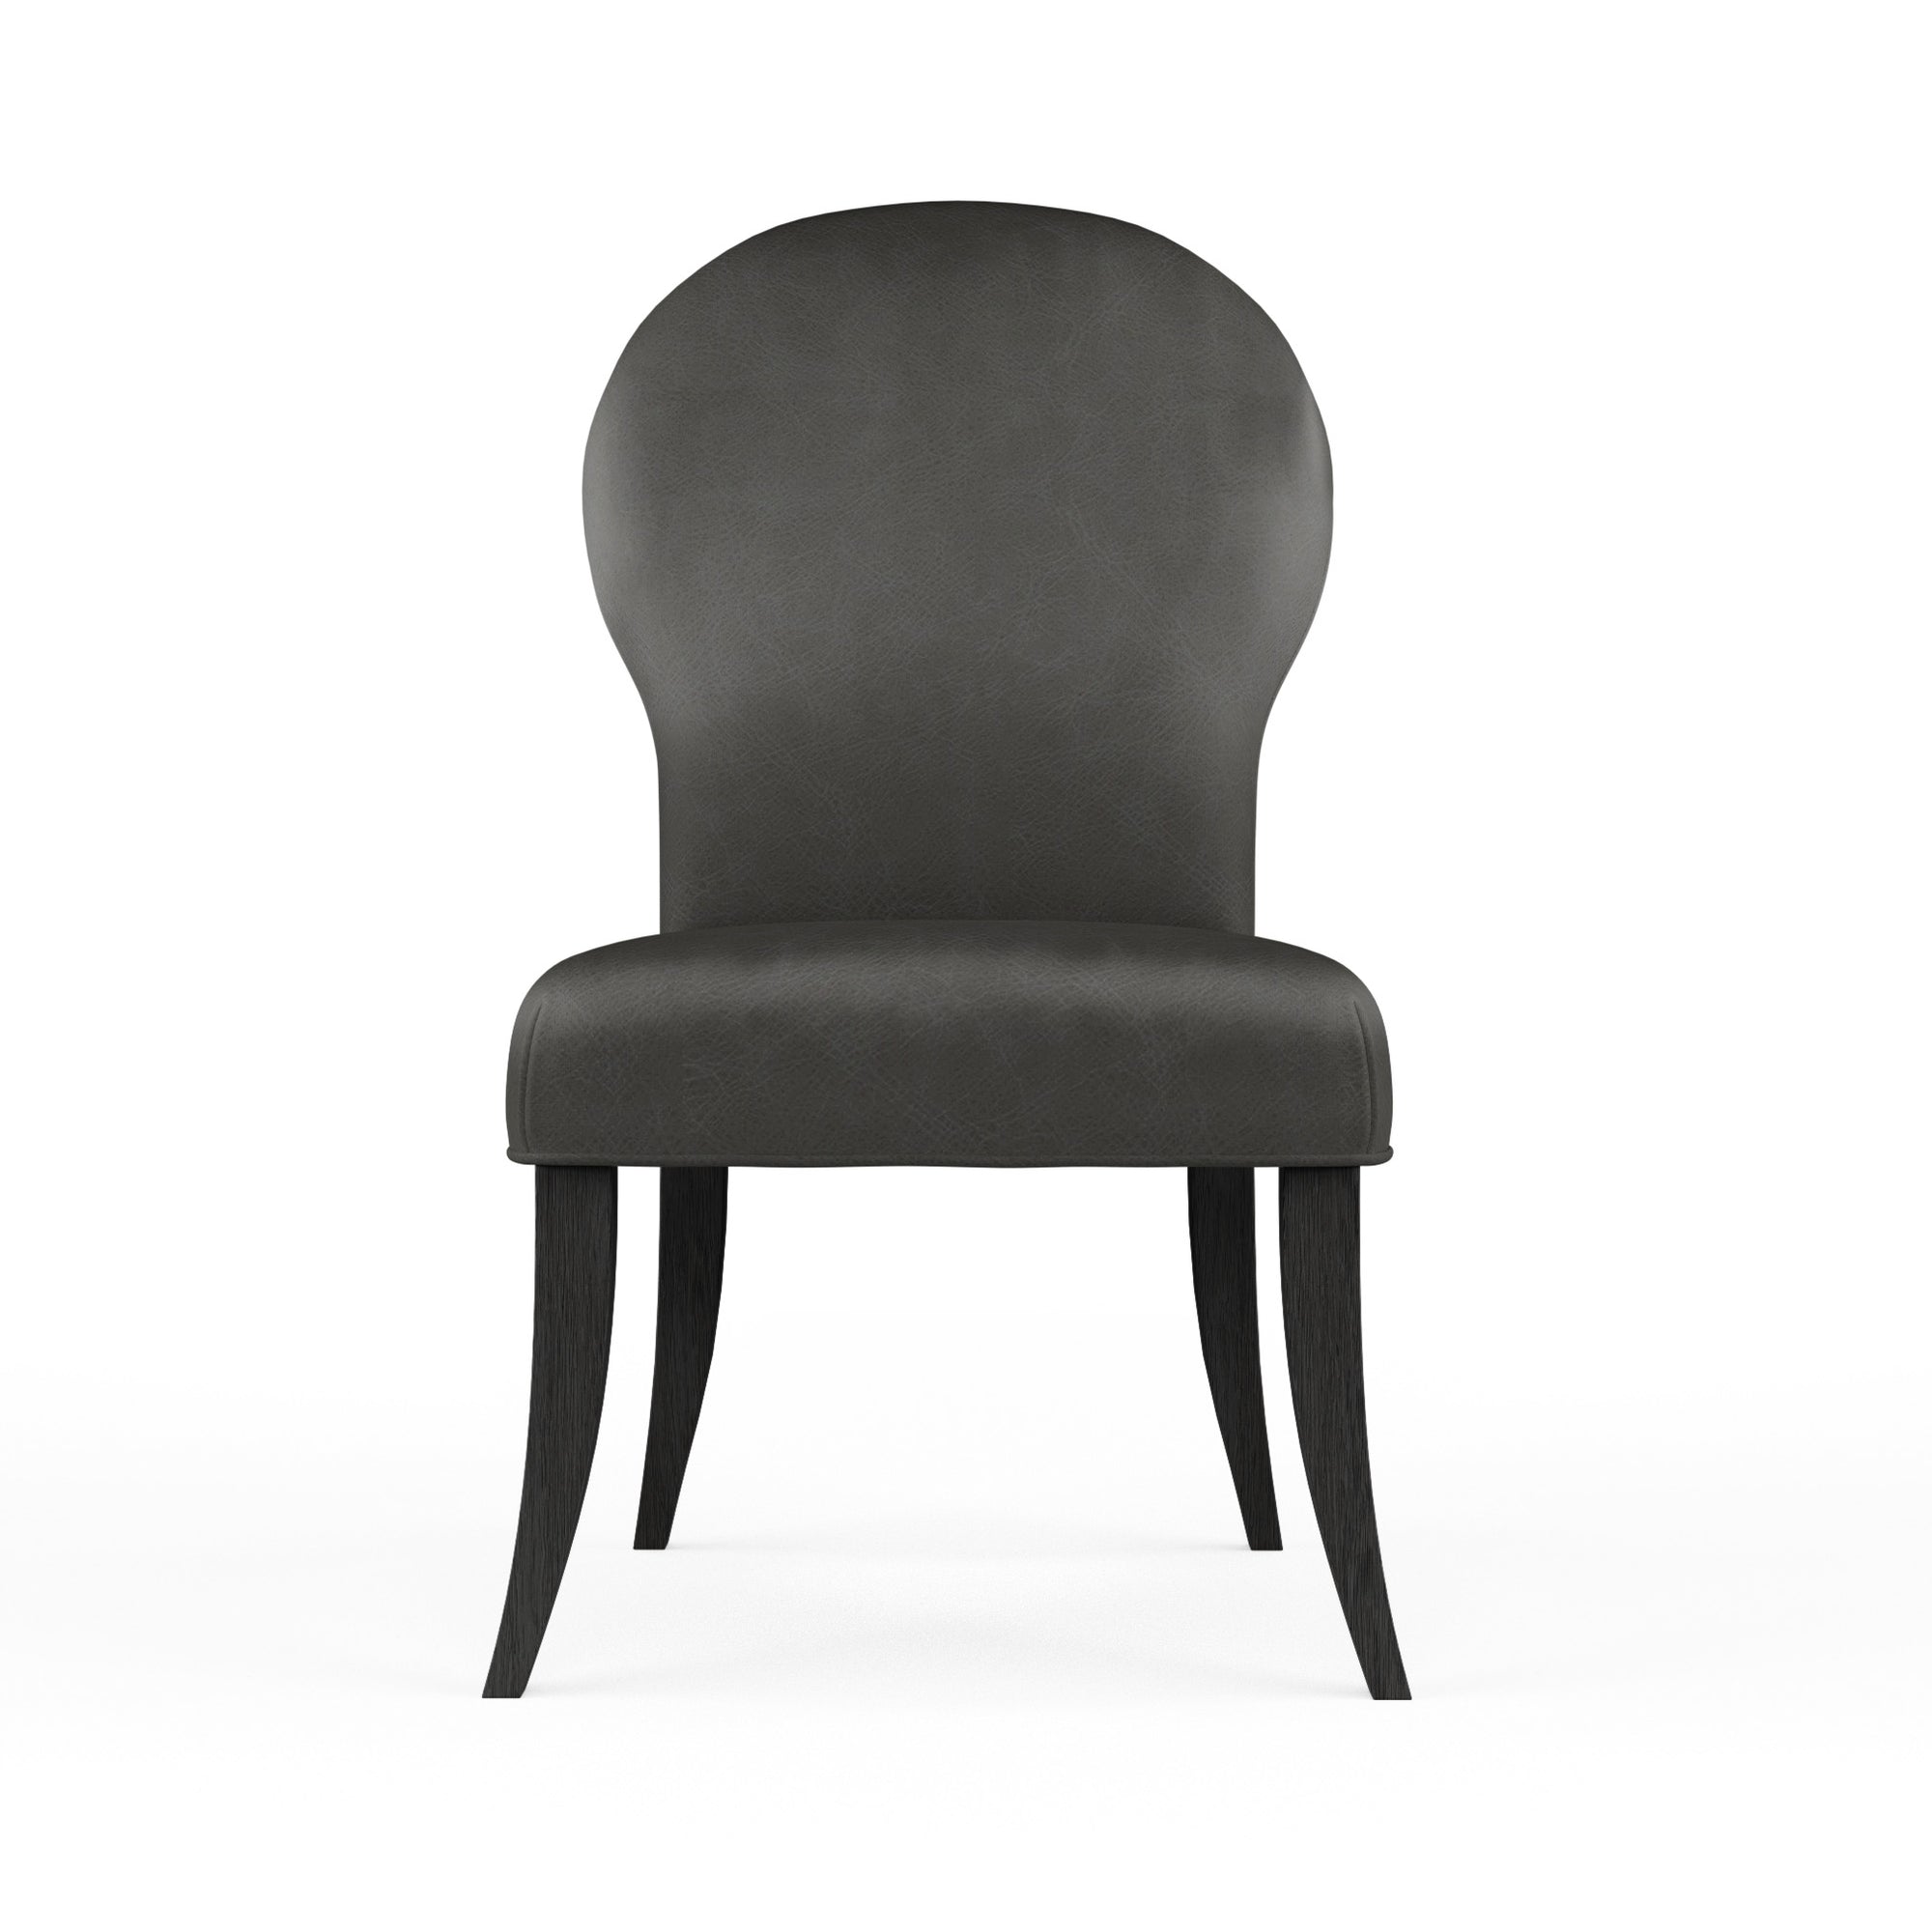 Caitlyn Dining Chair - Graphite Vintage Leather